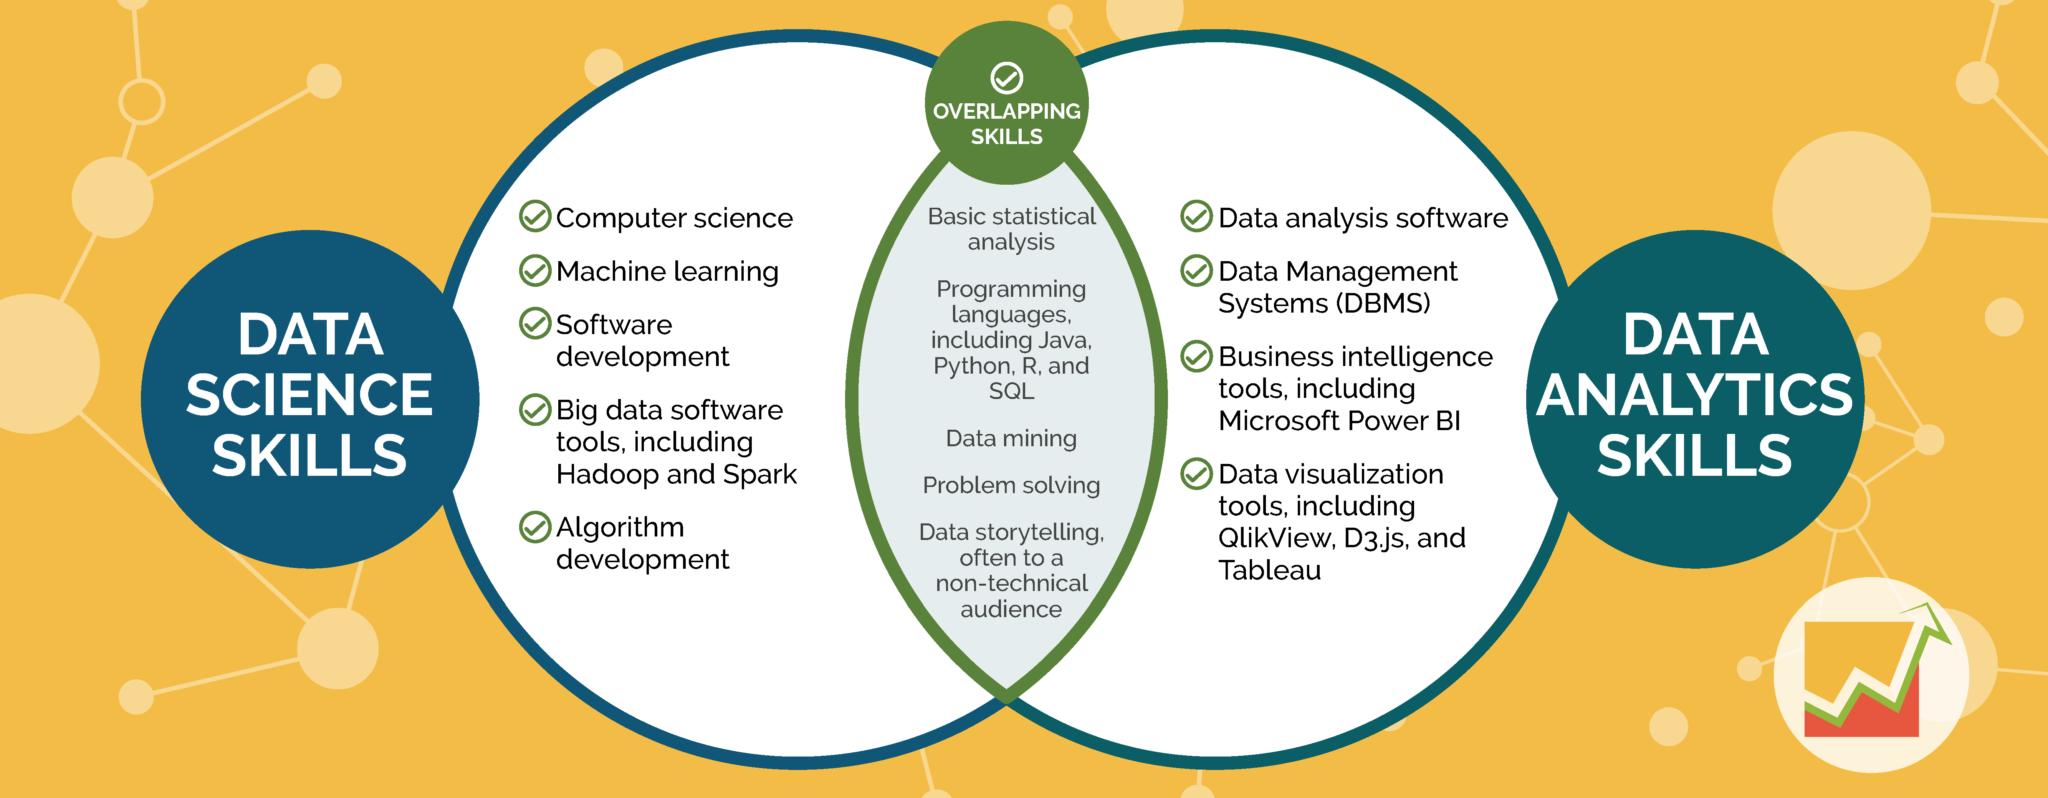 Data Science Vs Data Analytics The Differences Explained Uw Extended Campus